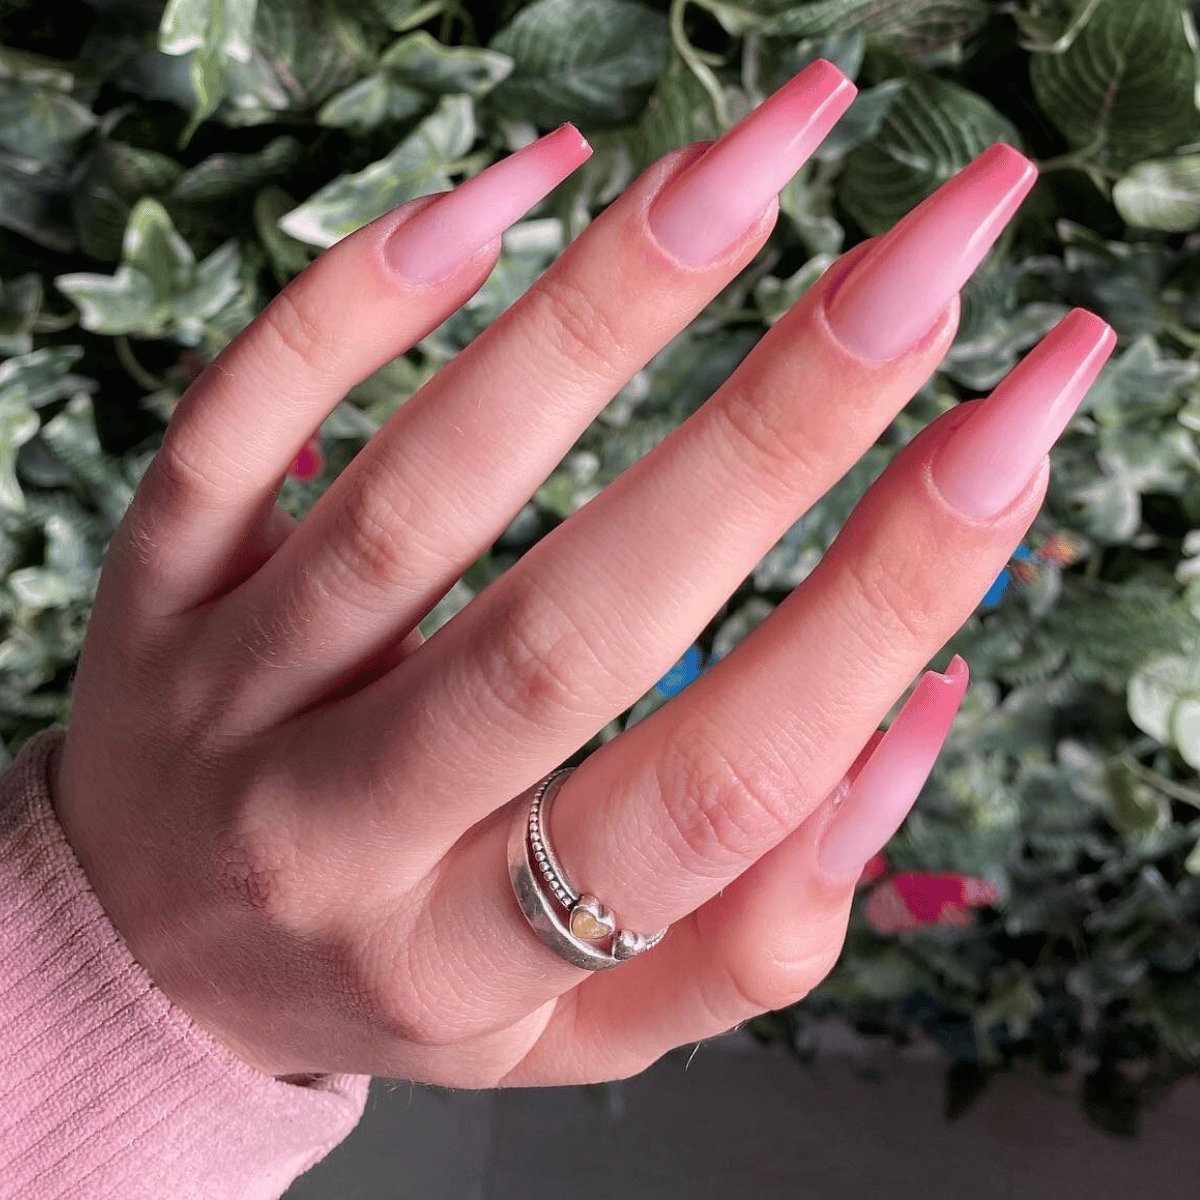 Acrylic Nails near me - The best Acrylic Nails places - Booksy.com